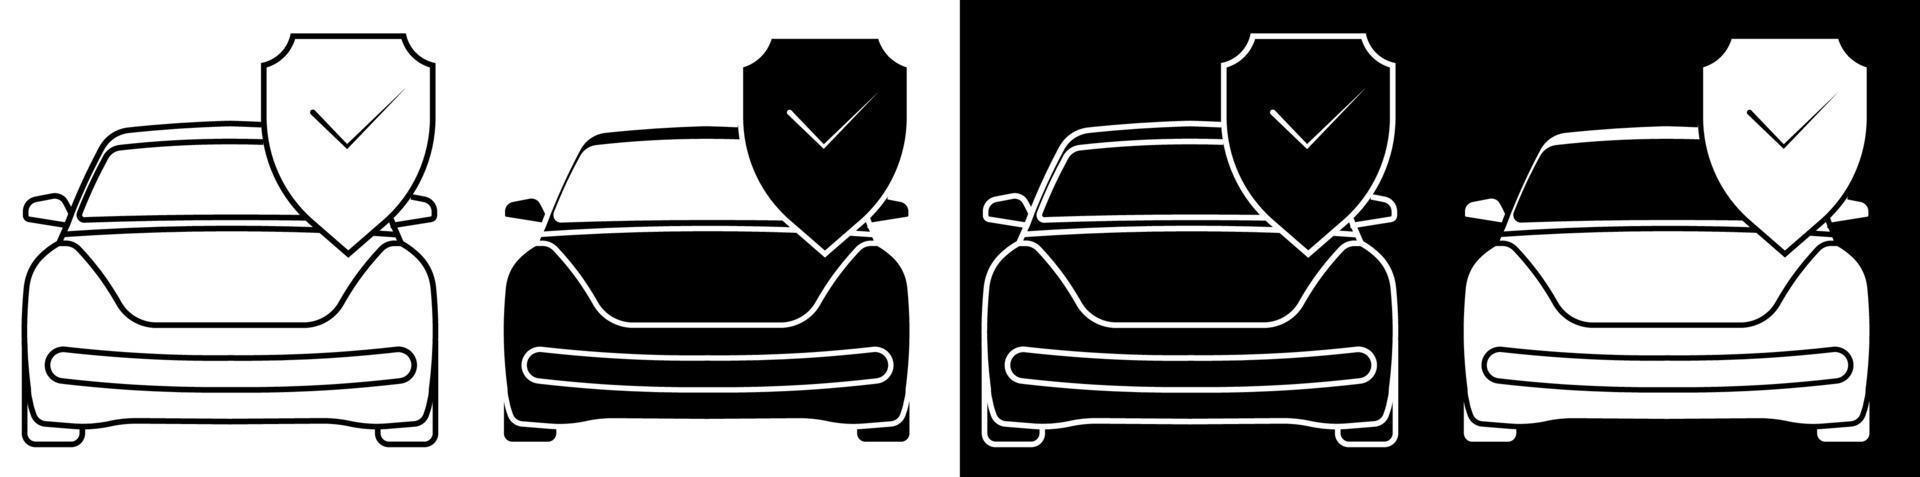 car insurance icons, property. Car is protected by shield. Property insurance. Vector